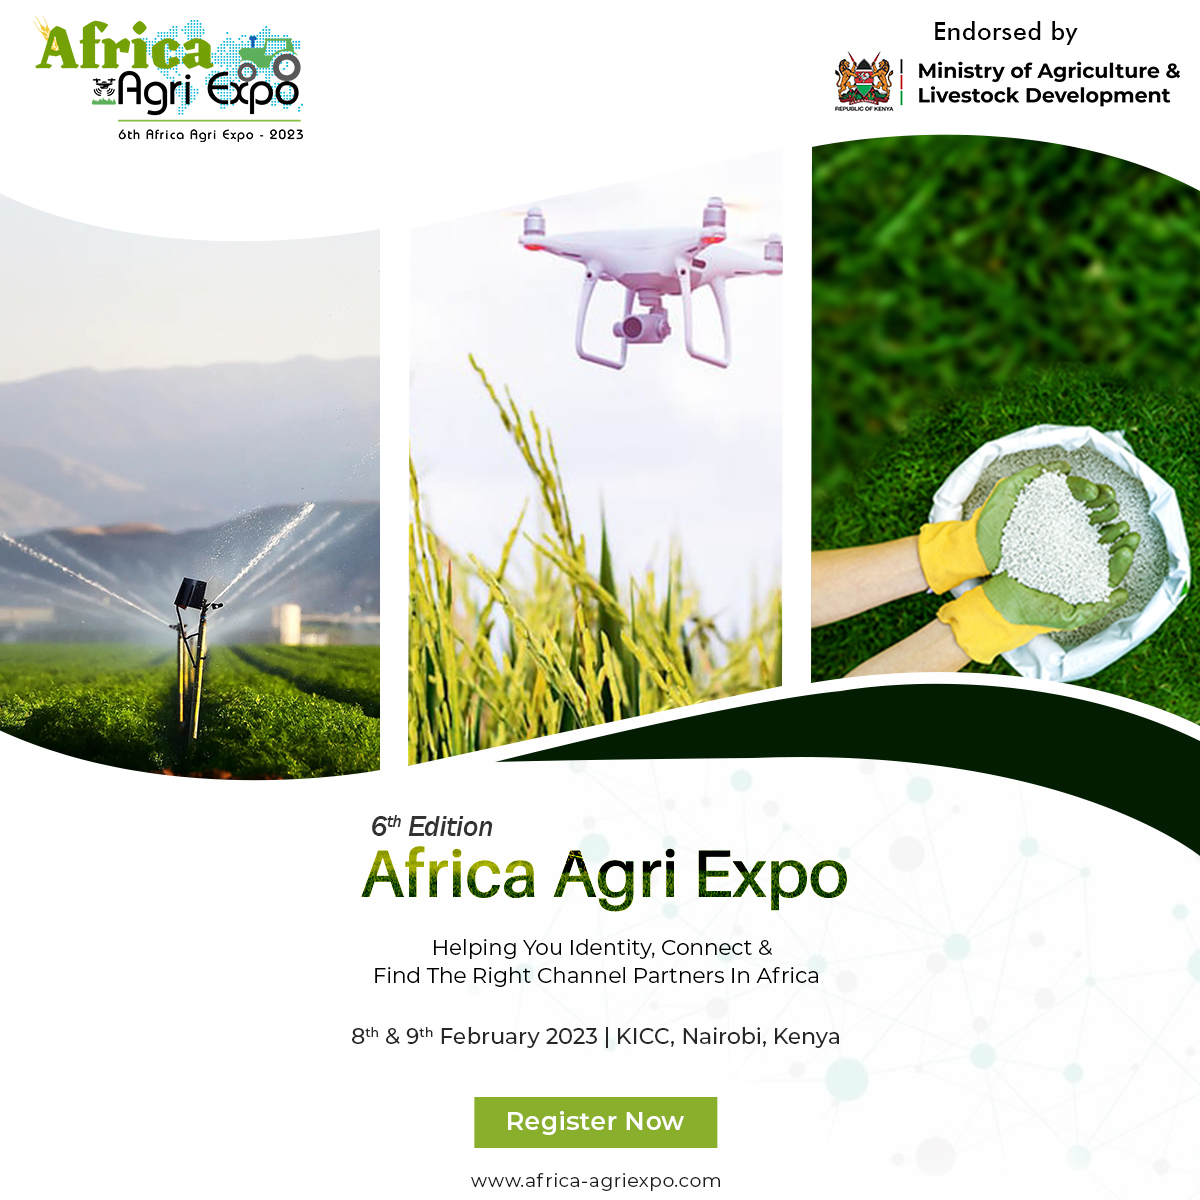 Kenya Investment Authority is glad to be supporting @globaltabgroup during the 6th Africa Agri Expo 2023. Register here - africa-agriexpo.com/visitor-regist… 

 @kilimoKE @IndustryKE @Investment_Ke @Trade_Kenya @KenInvestMD 
#InvestKenya #opportunitiesKE #AfricaAgriExpo2023